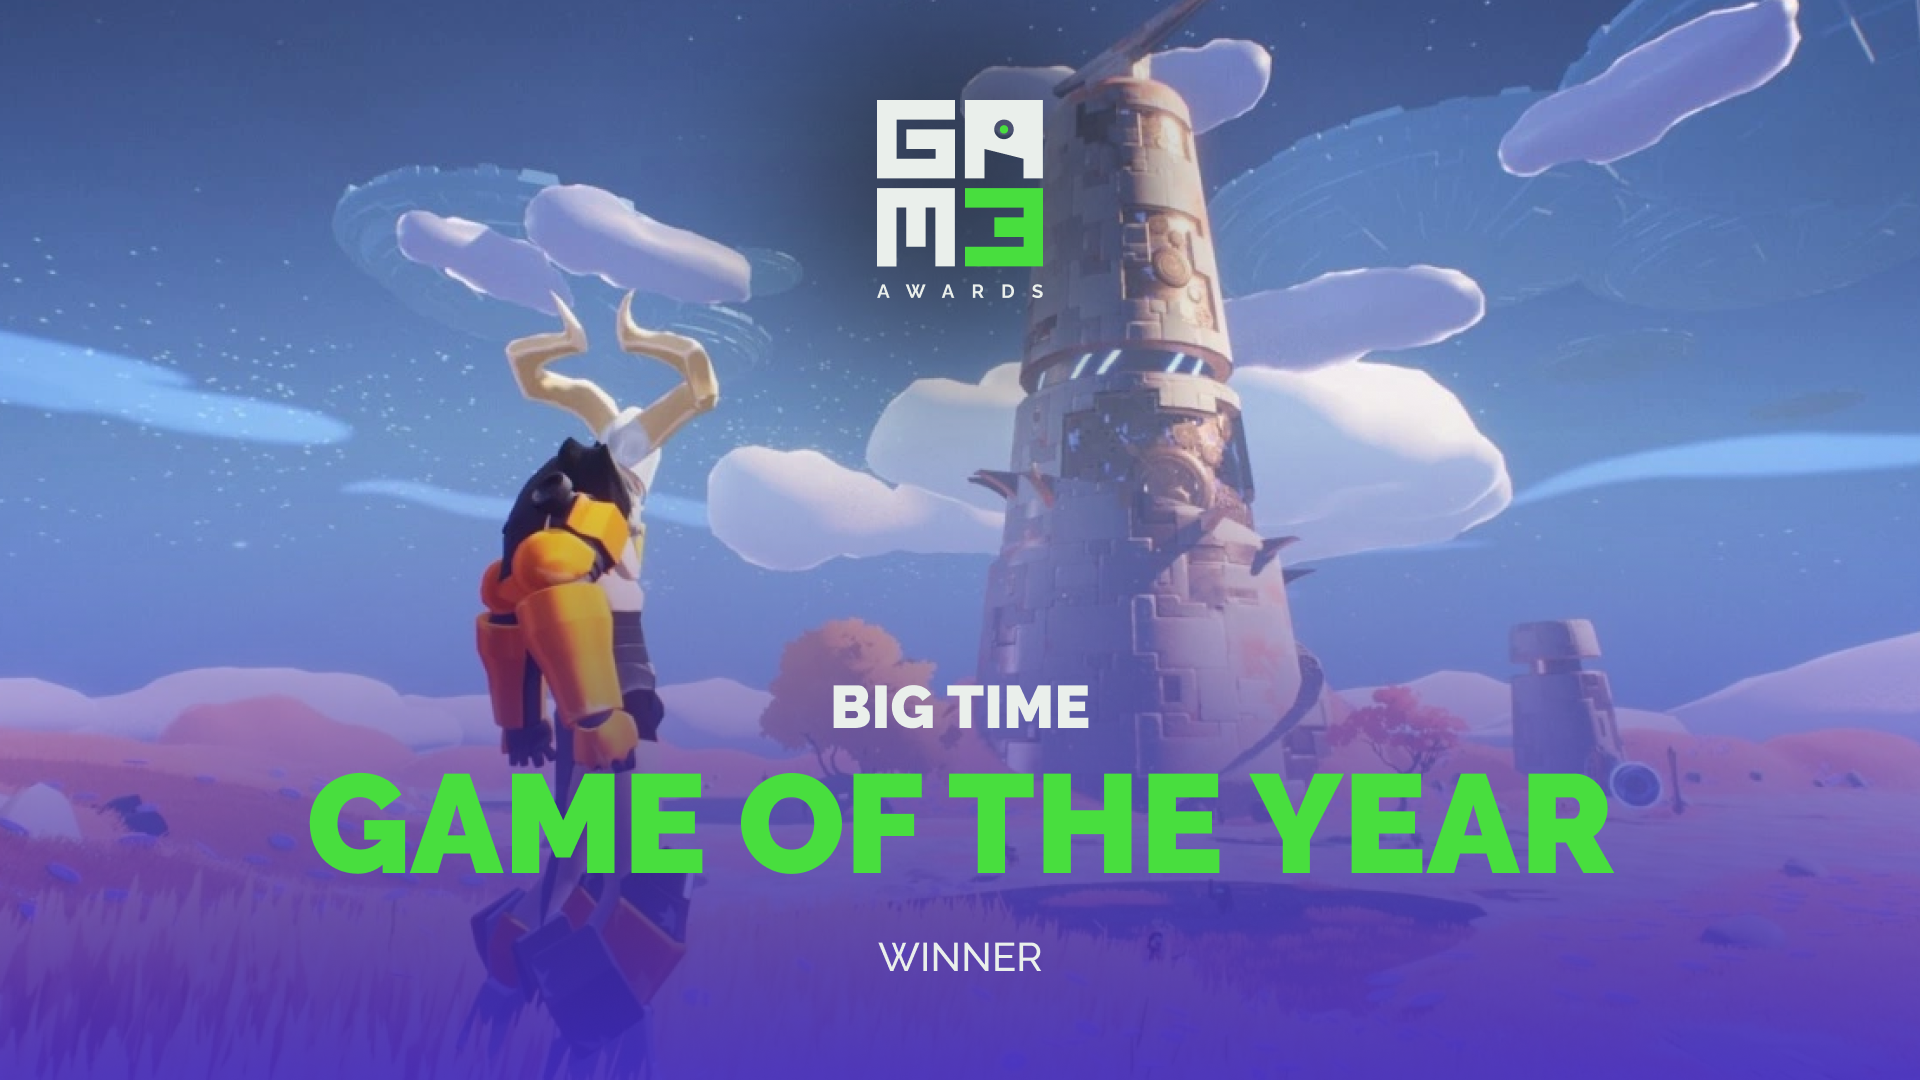 Big Time wins Game of the Year at 2022 Gam3 Awards